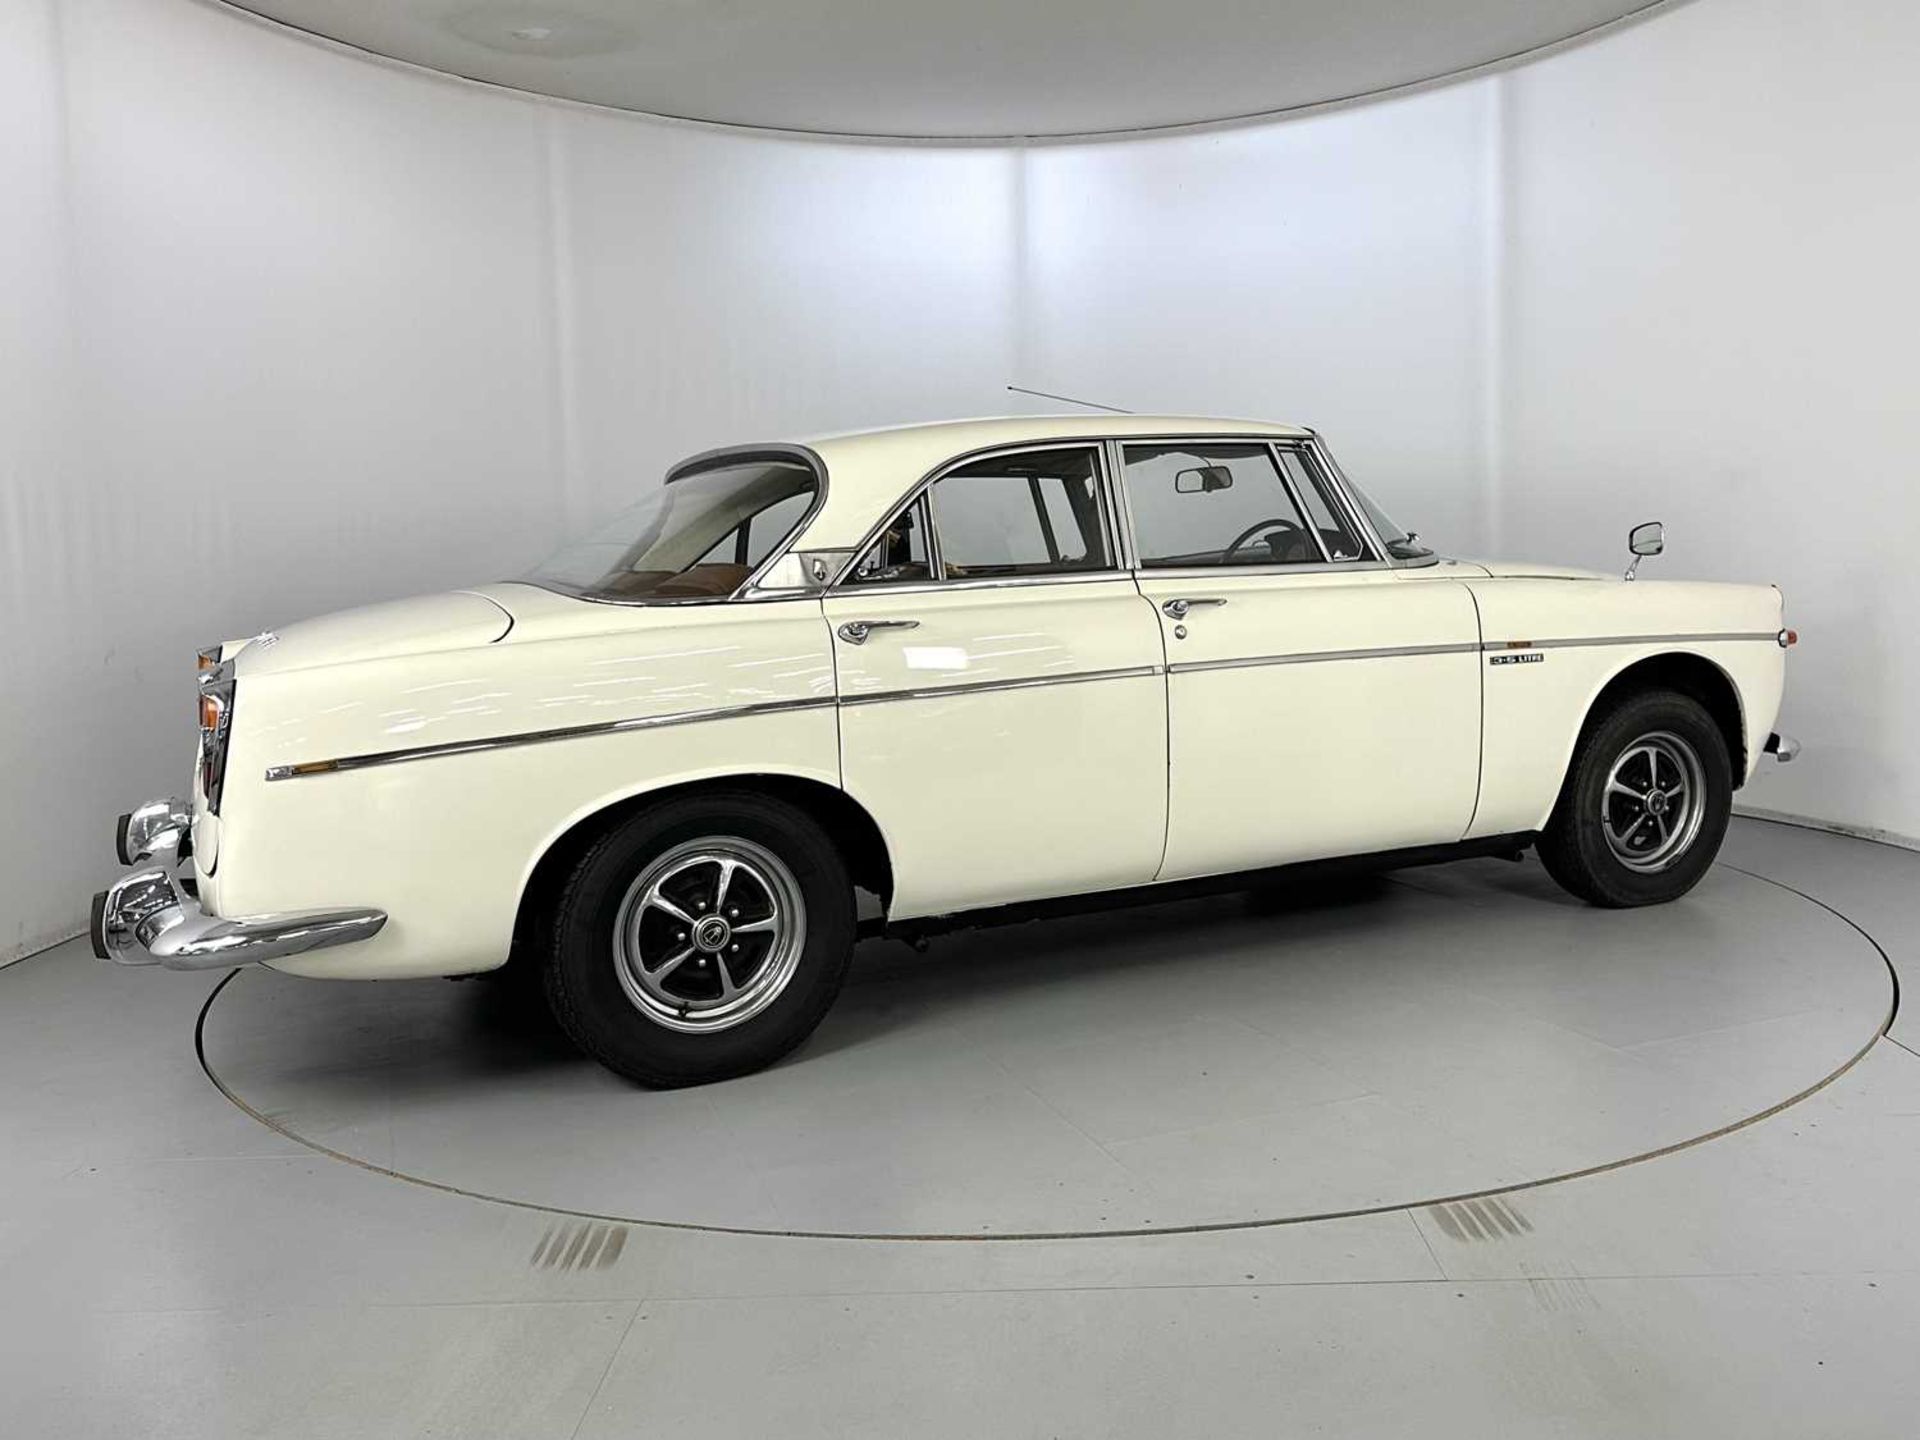 1970 Rover P5 B Coupe - Image 10 of 34